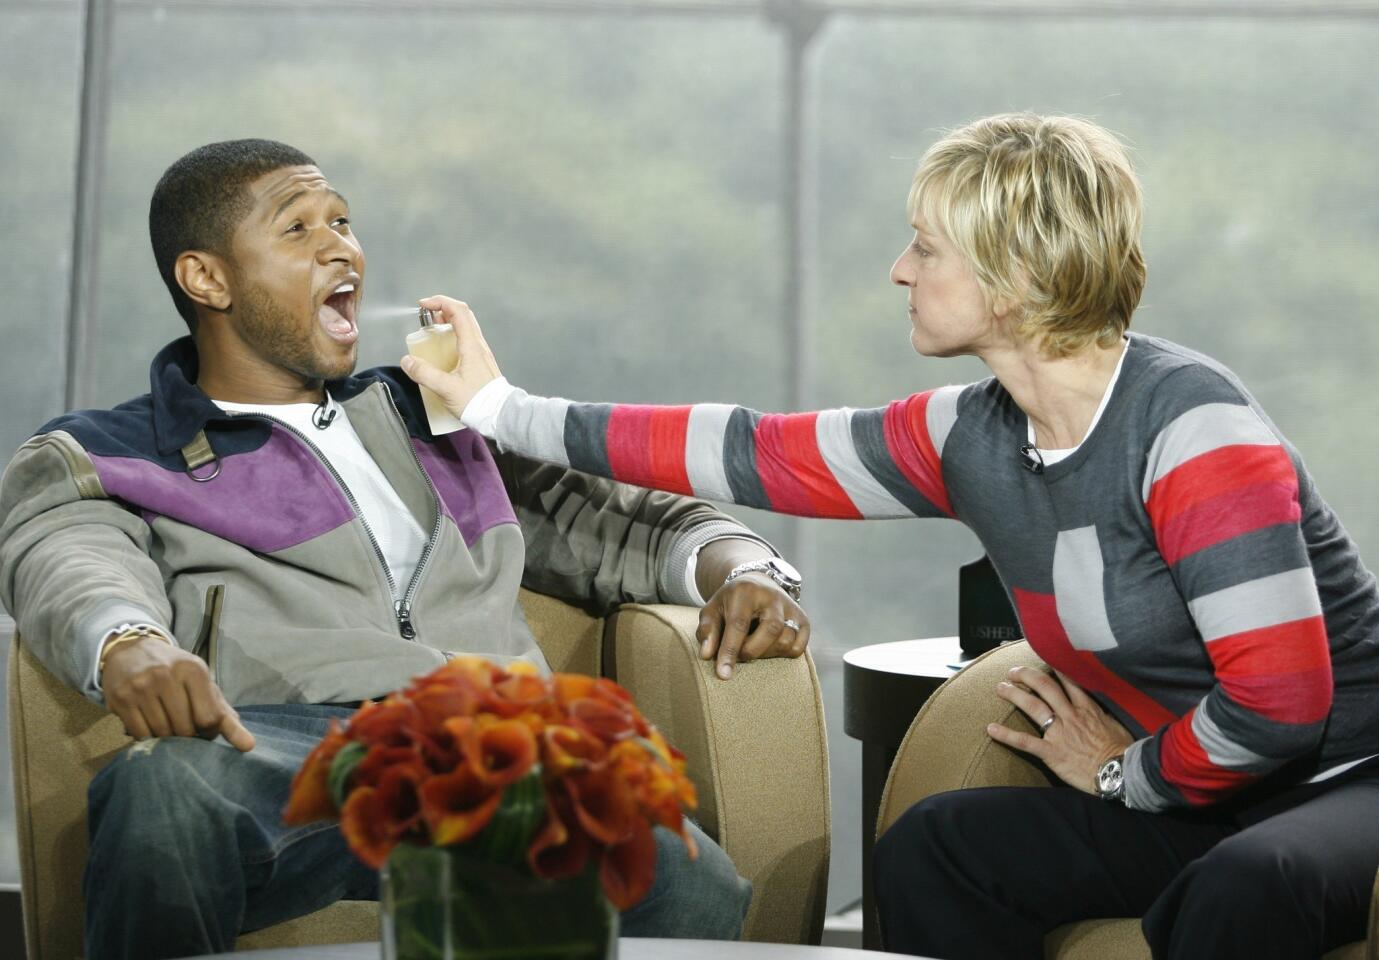 Ellen DeGeneres gives Usher a sample of his newest scent, "Usher She," in the Allen Room, Frederick P. Rose Hall, at Lincoln Center, on Aug. 31, 2007.